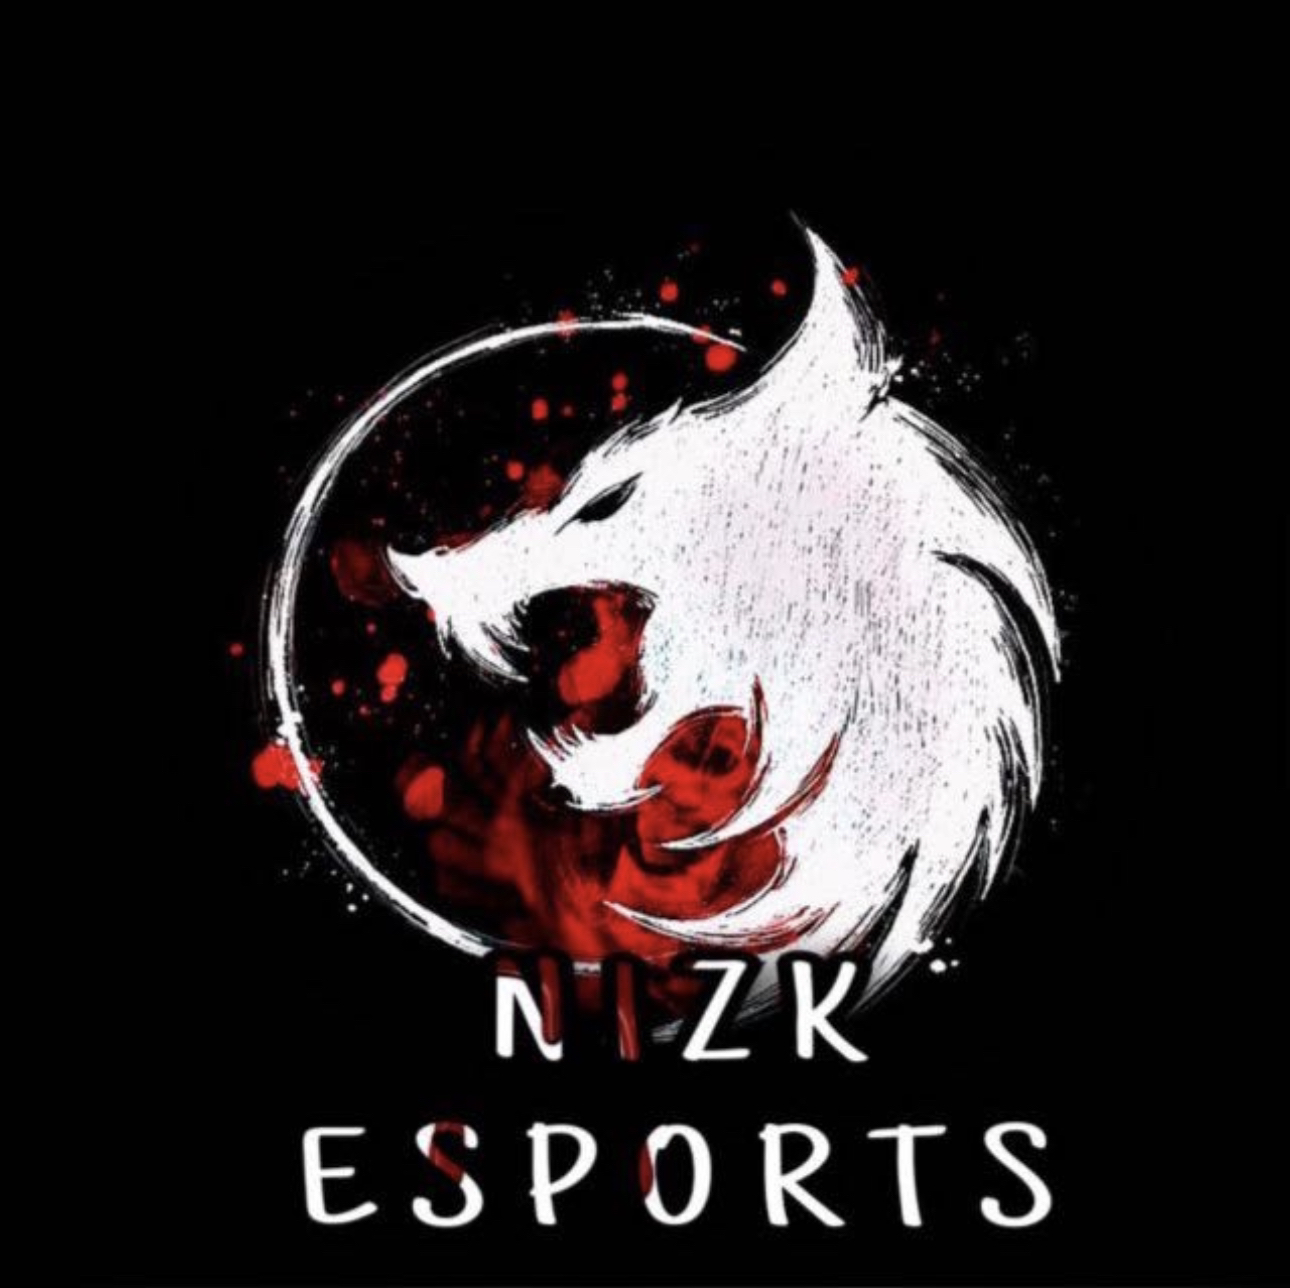 N1zK